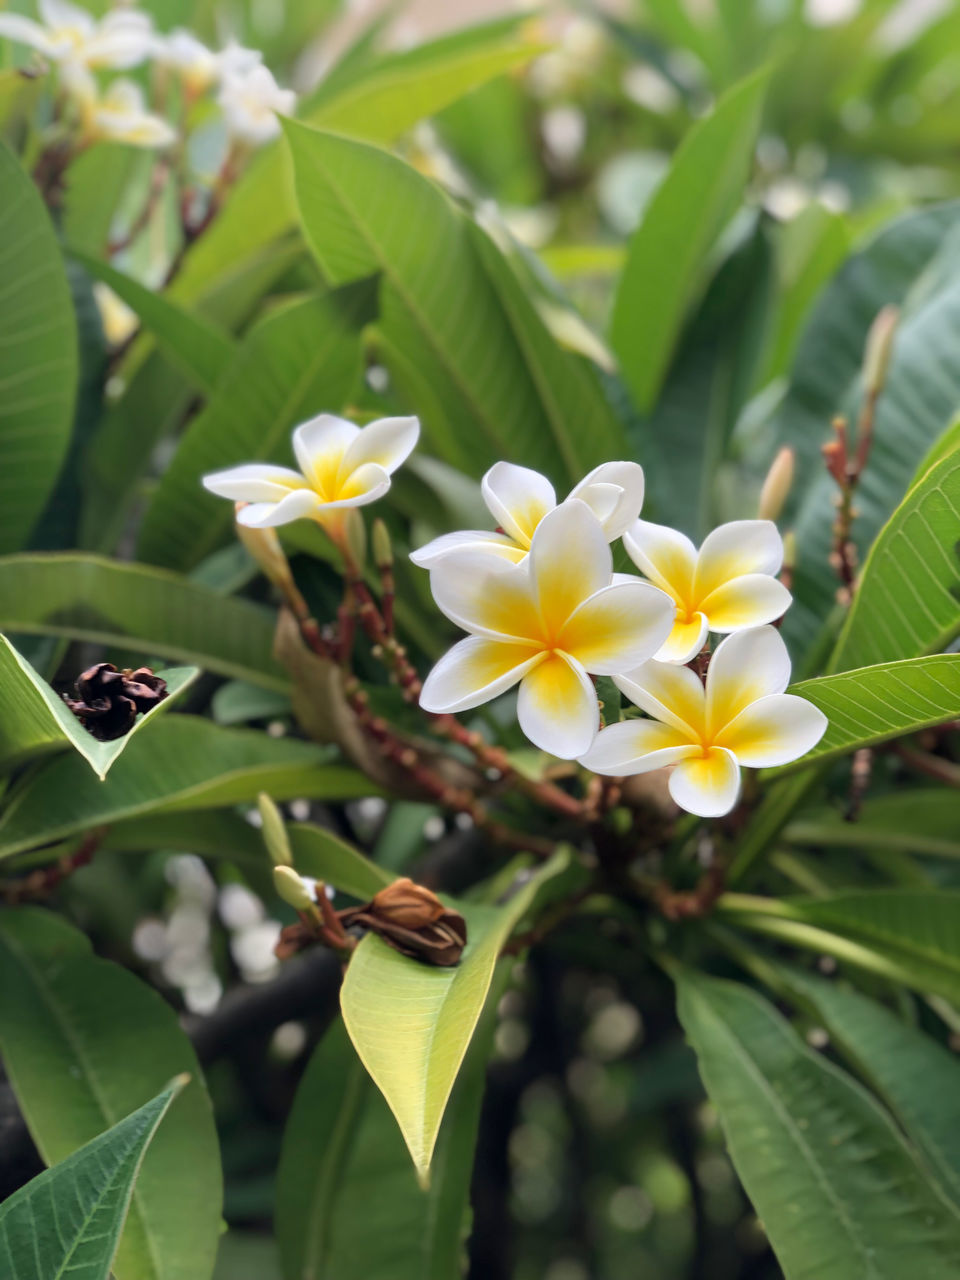 plant, flower, flowering plant, leaf, plant part, beauty in nature, nature, freshness, growth, close-up, yellow, petal, flower head, green, blossom, fragility, no people, tree, inflorescence, outdoors, food and drink, food, environment, botany, fruit, frangipani, tropical climate, focus on foreground, springtime, land, summer, day